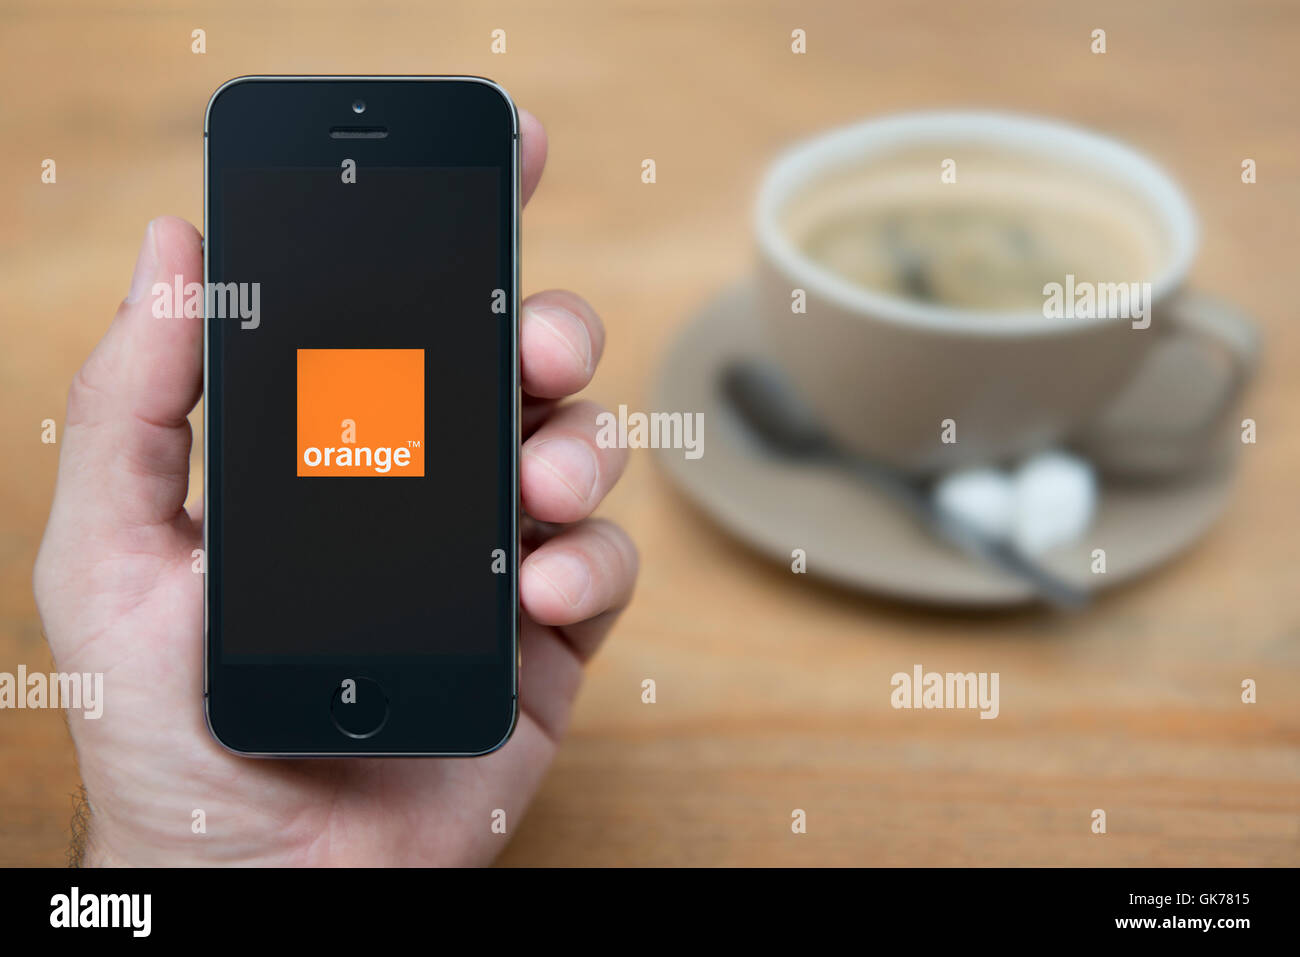 A man looks at his iPhone which displays the Orange logo, while sat with a cup of coffee (Editorial use only). Stock Photo